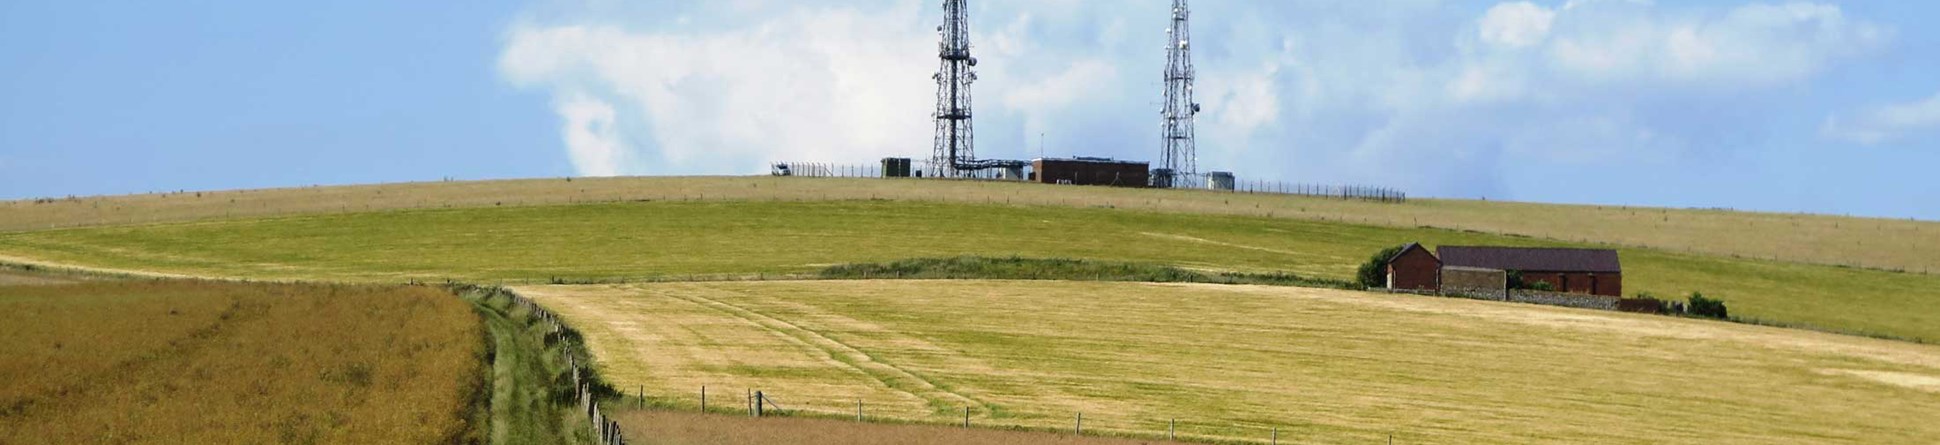 A landscape with fields, farm buildings and telecommunications masts.